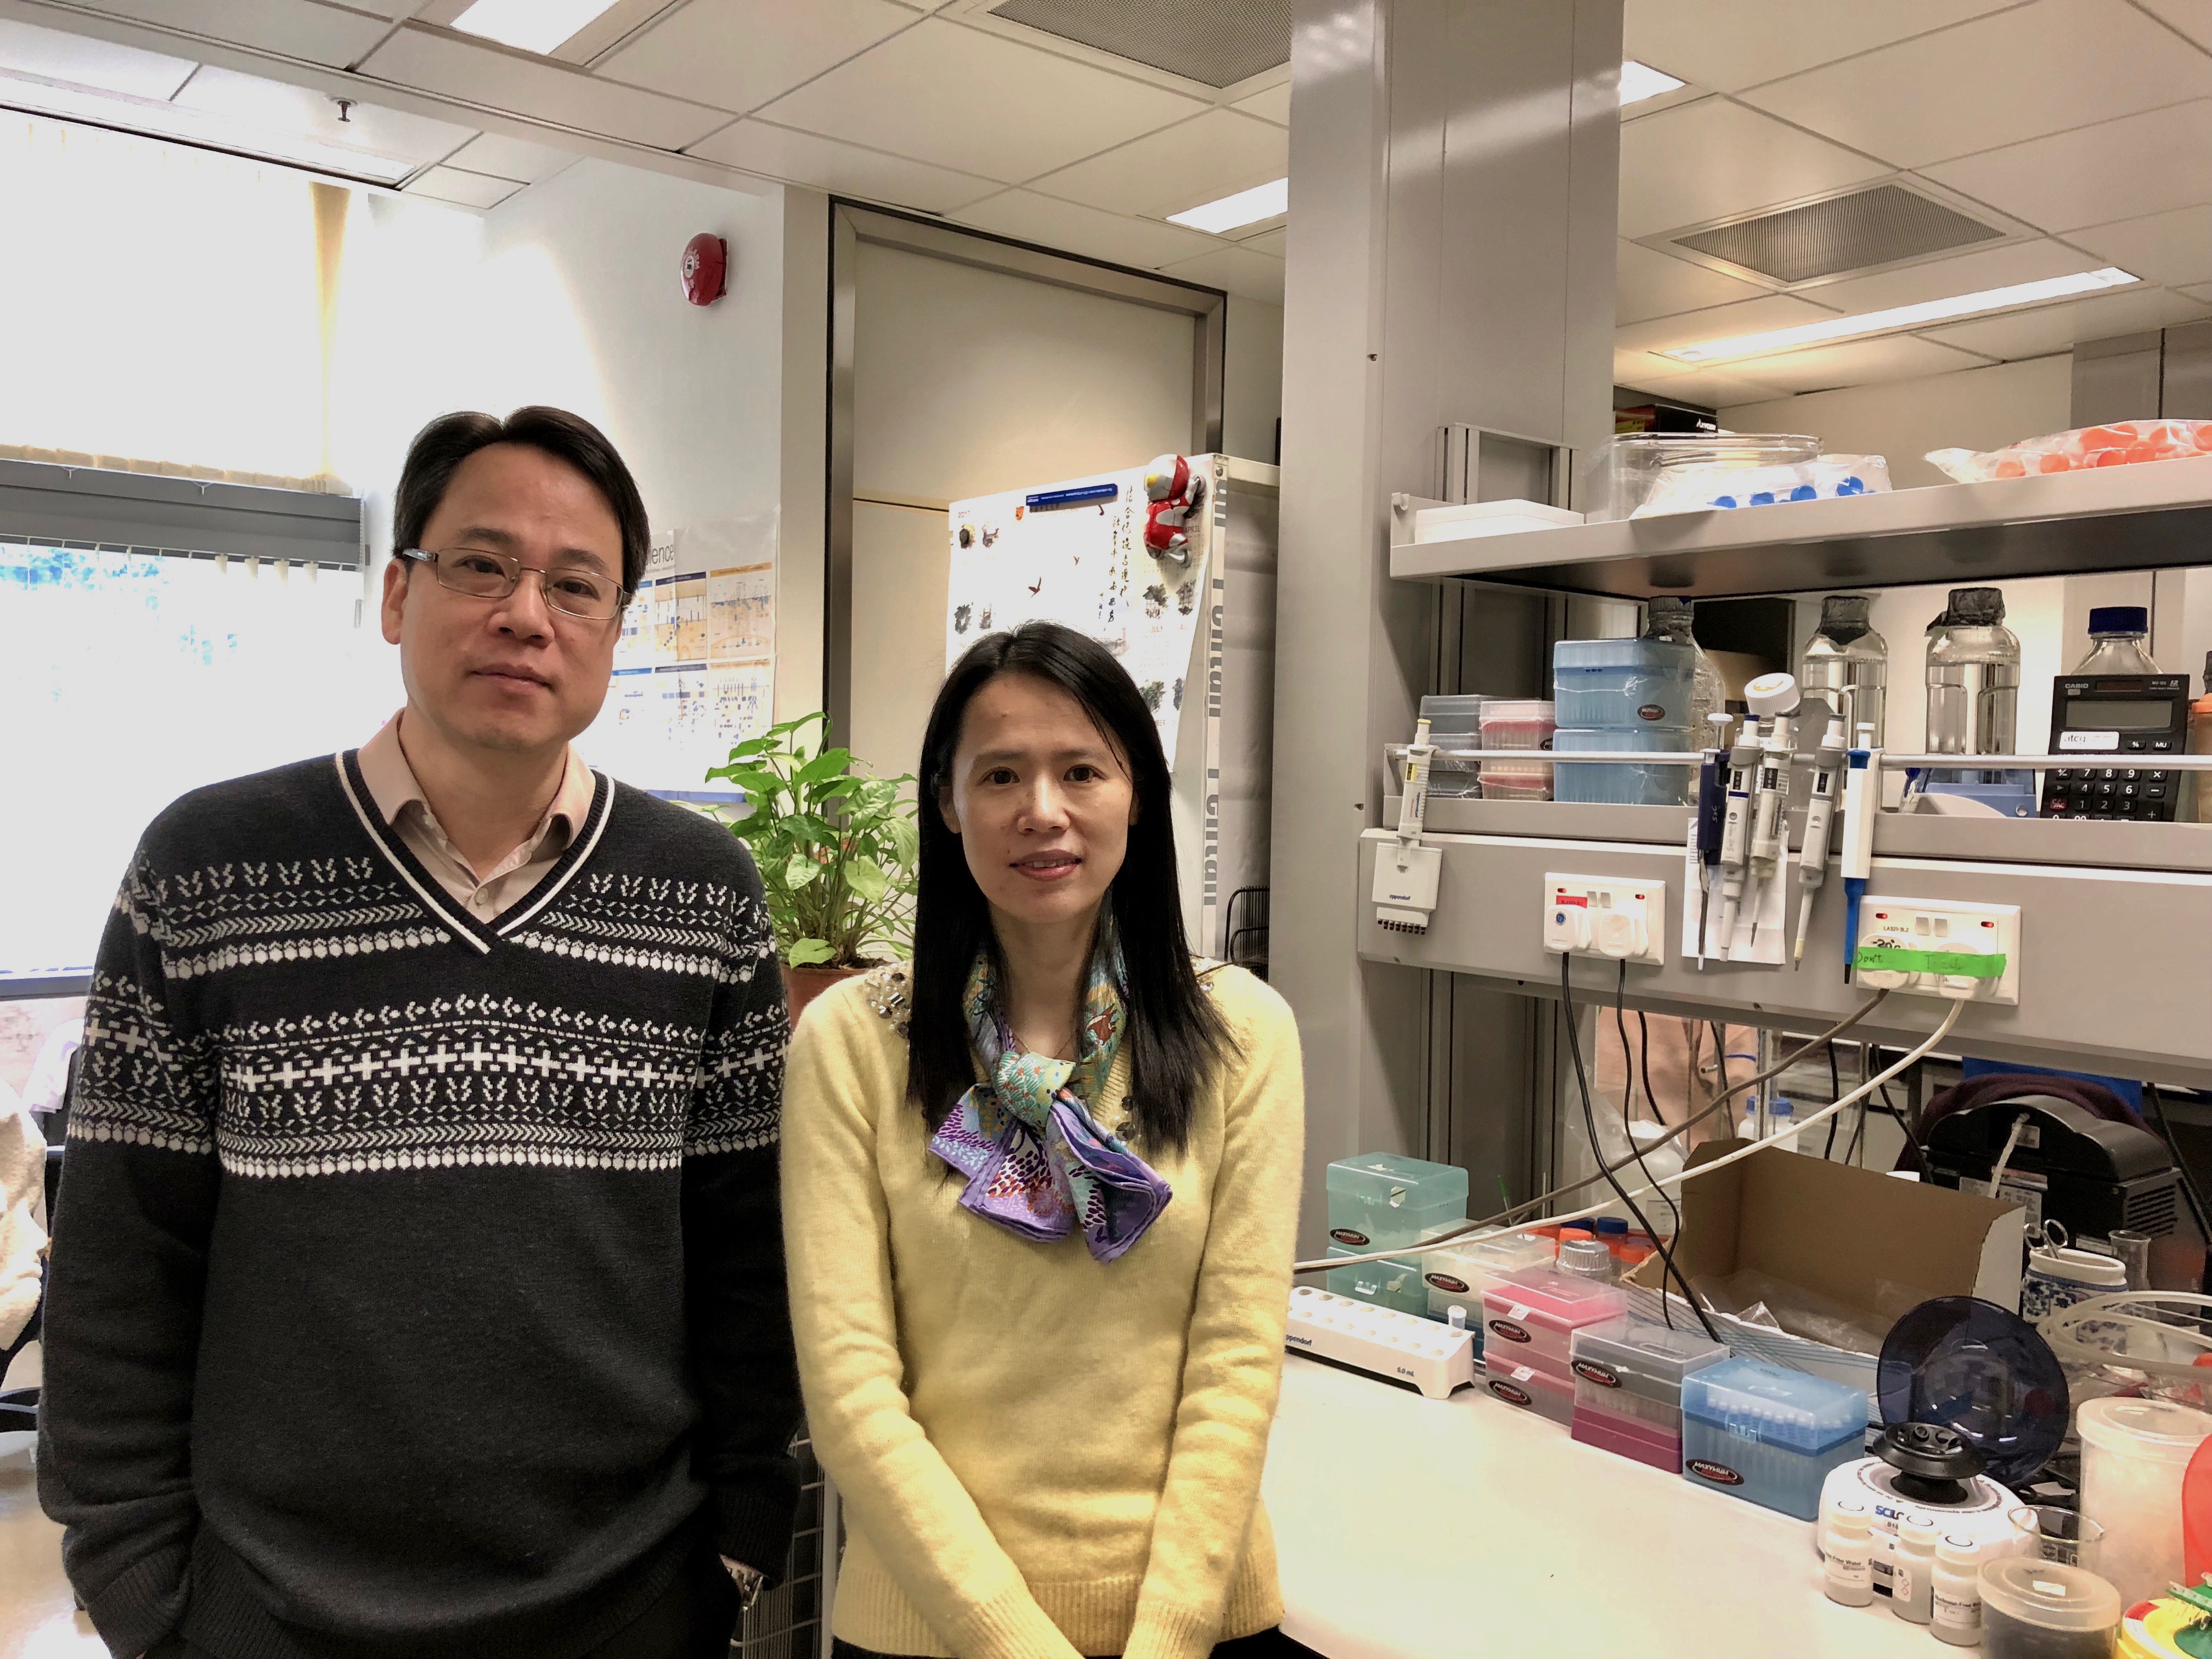 A study led by (right) Prof. Ya KE, Associate Professor of the School of Biomedical Sciences of the Faculty of Medicine at The Chinese University of Hong Kong, discovered that an enzyme called cystathionine β-synthase (CBS) is essential to maintain body iron homeostasis. The results may benefit patients suffering from hemochromatosis due to unknown causes and provide new directions for diagnosis and treatment. Featured on the left is co-investigator Prof. Wing Ho YUNG, Director of the Gerald Choa Neuroscience Centre.